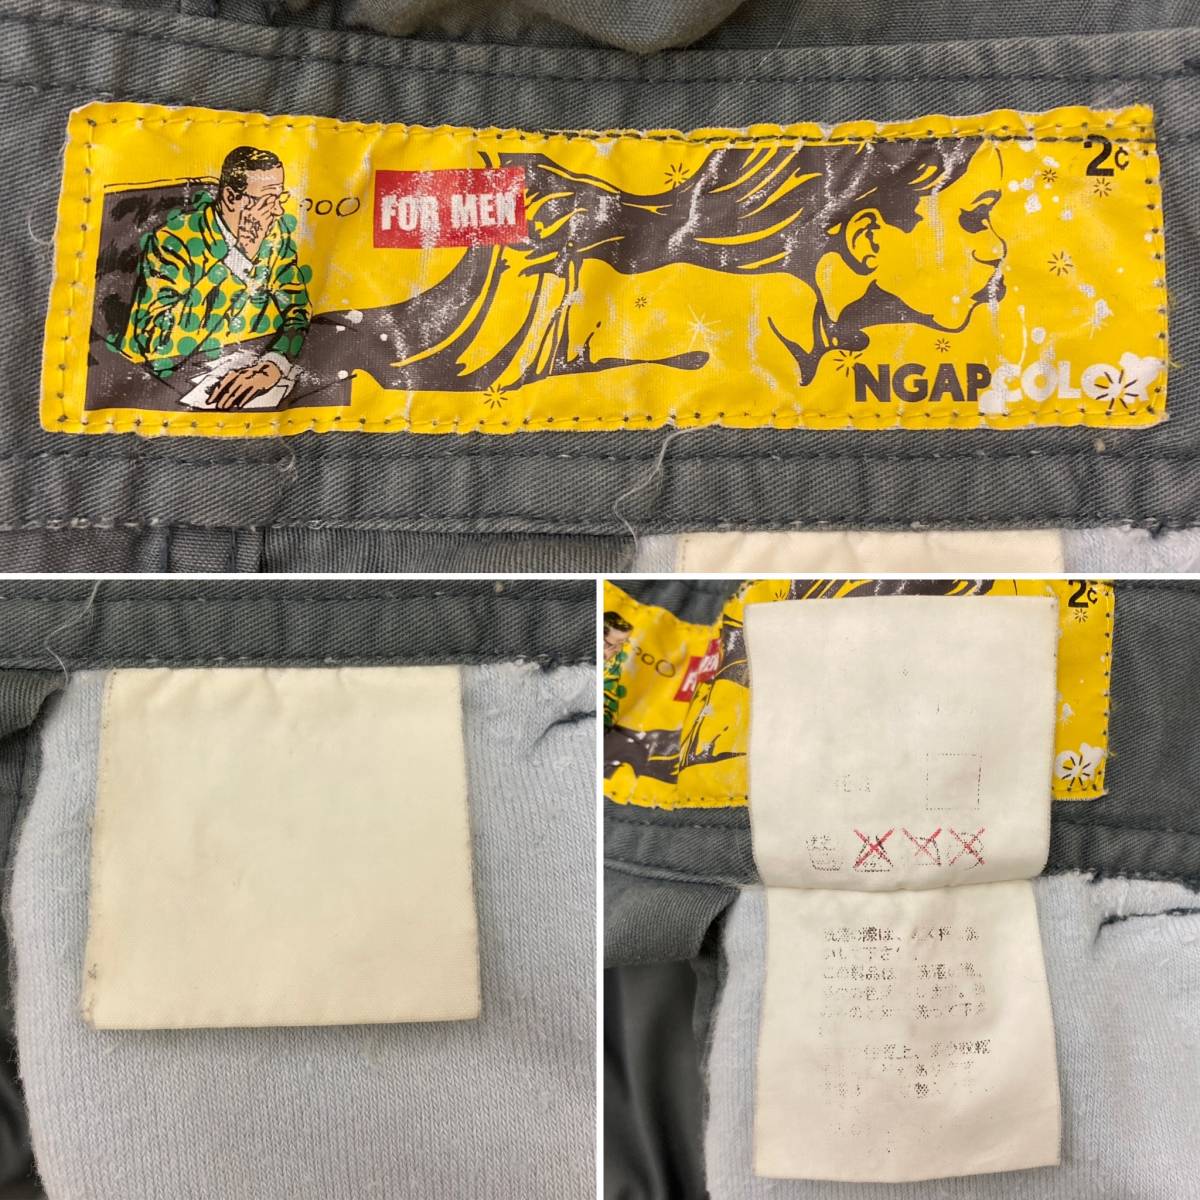 NGAP all-in-one Logo print gray 2 size enji-e-pi- coveralls Jump suit Work SKOLOCT 90s UNDERCOVER handling 2090513